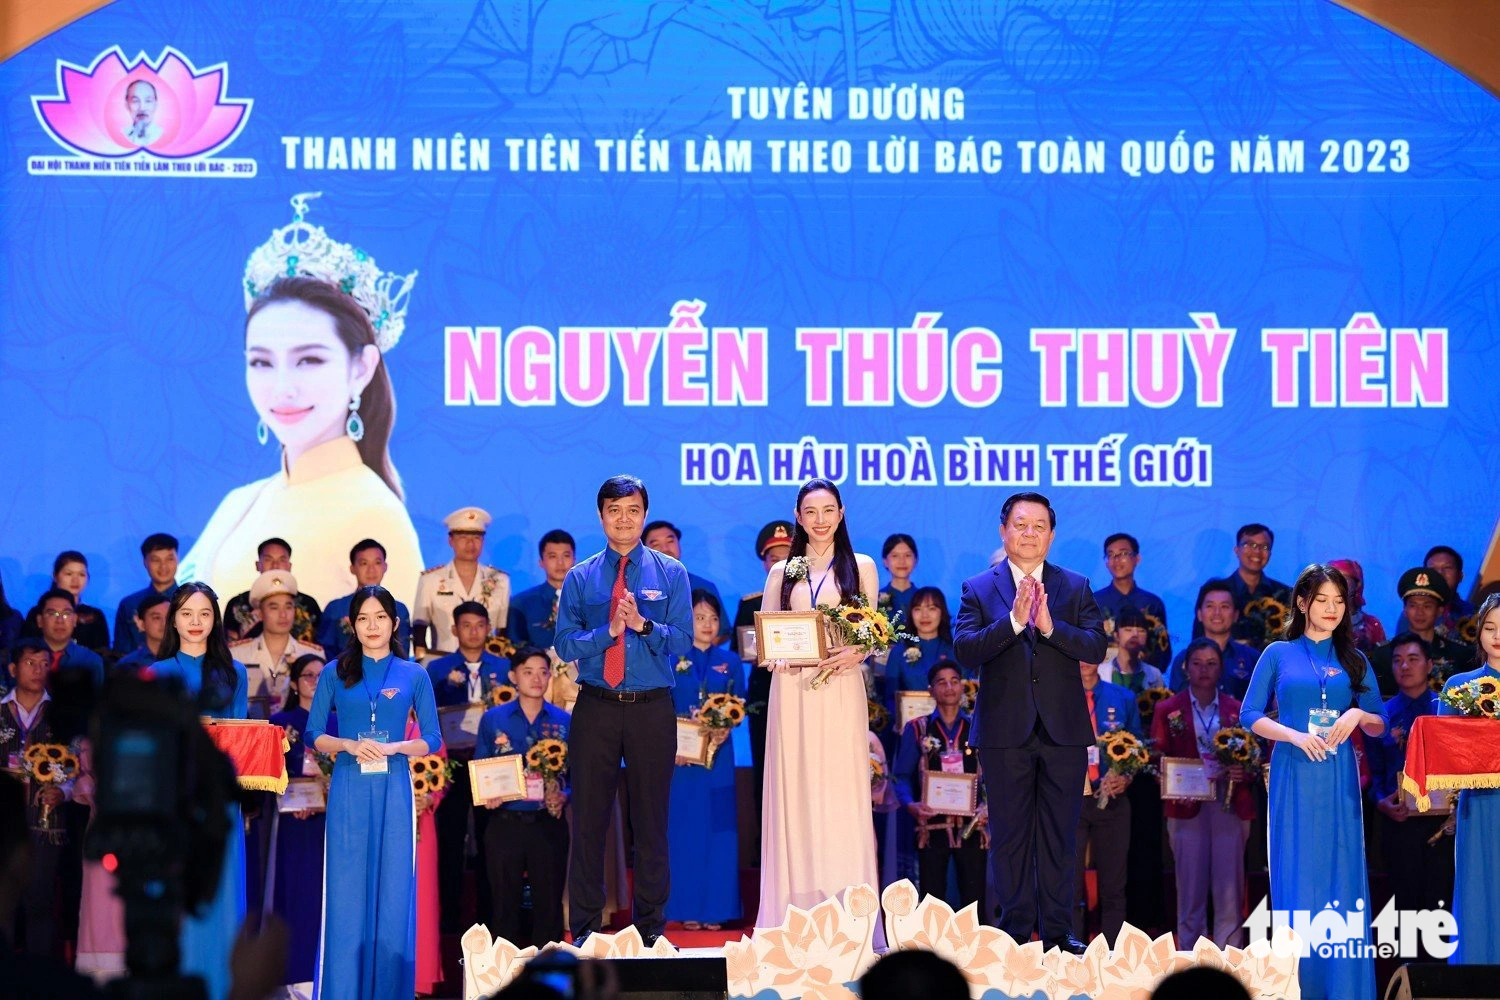 Miss Nguyen Thuc Thuy Tien is one of the 420 delegates applauded at the National Congress of Advanced Youth in 2023, following Uncle Ho's words - Photo: Nam Tran